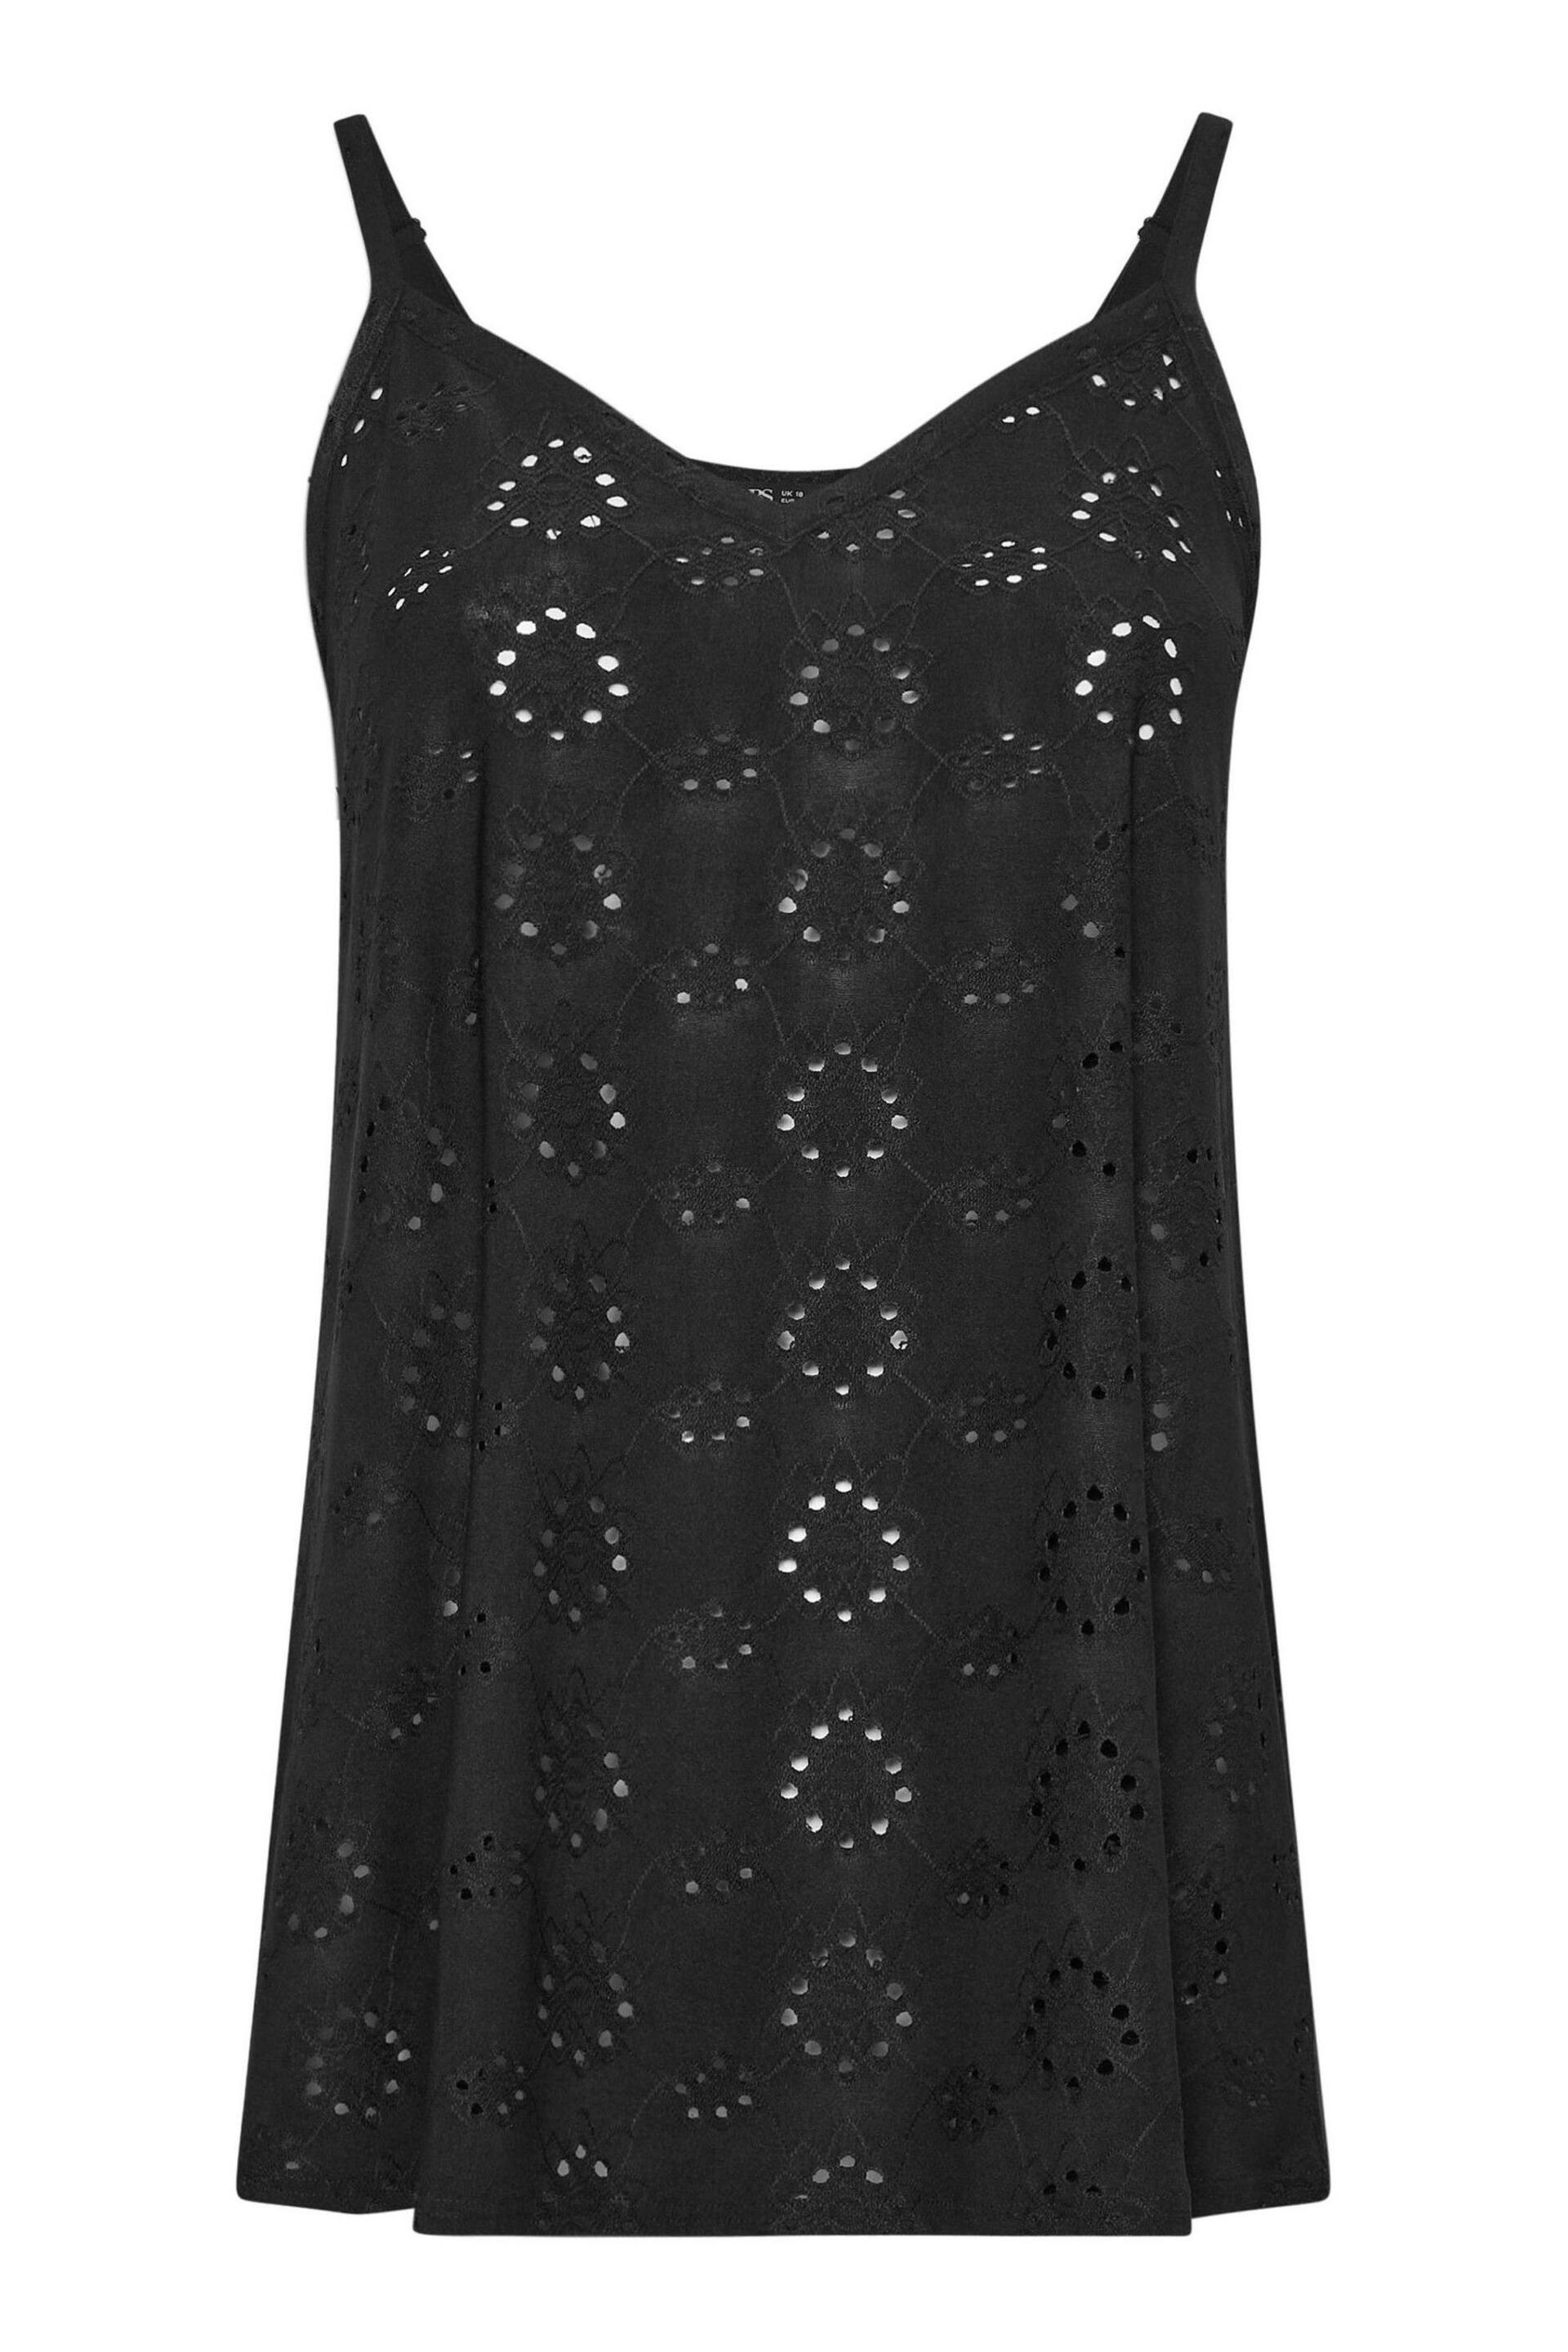 Yours Curve Black Broderie Cami - Image 5 of 5